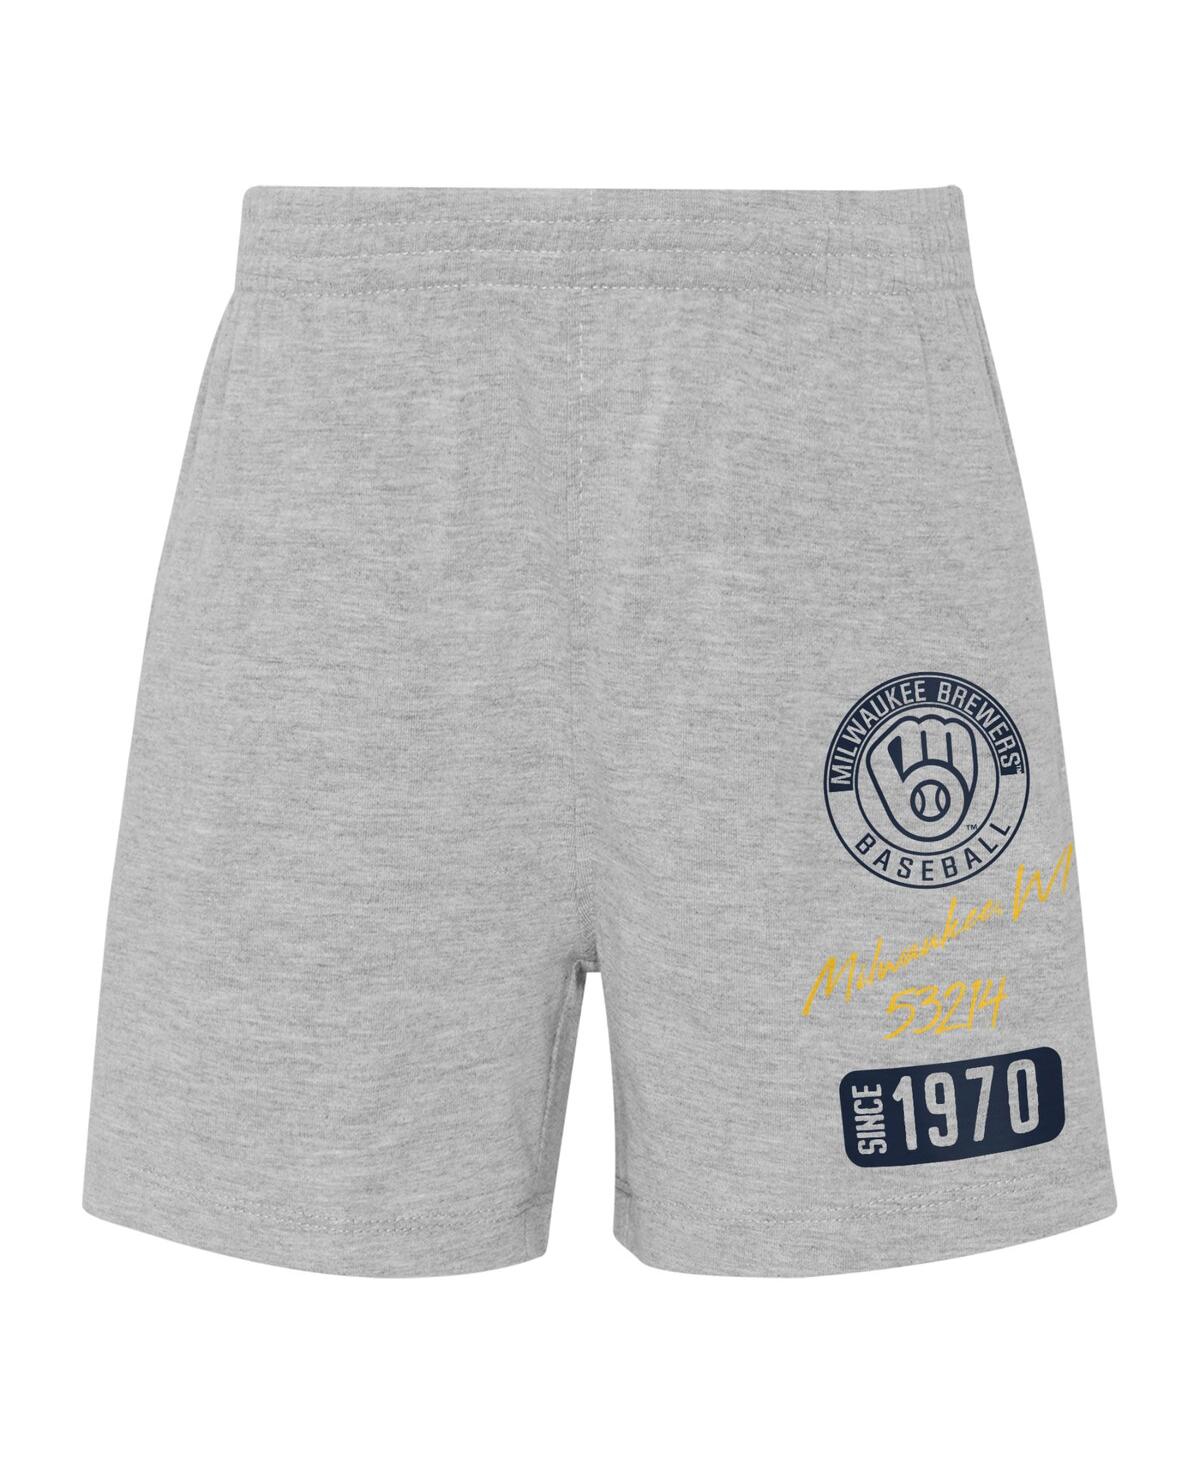 Shop Outerstuff Baby Boys And Girls Gold, Heather Gray Milwaukee Brewers Ground Out Baller Raglan T-shirt And Shorts In Gold,heather Gray